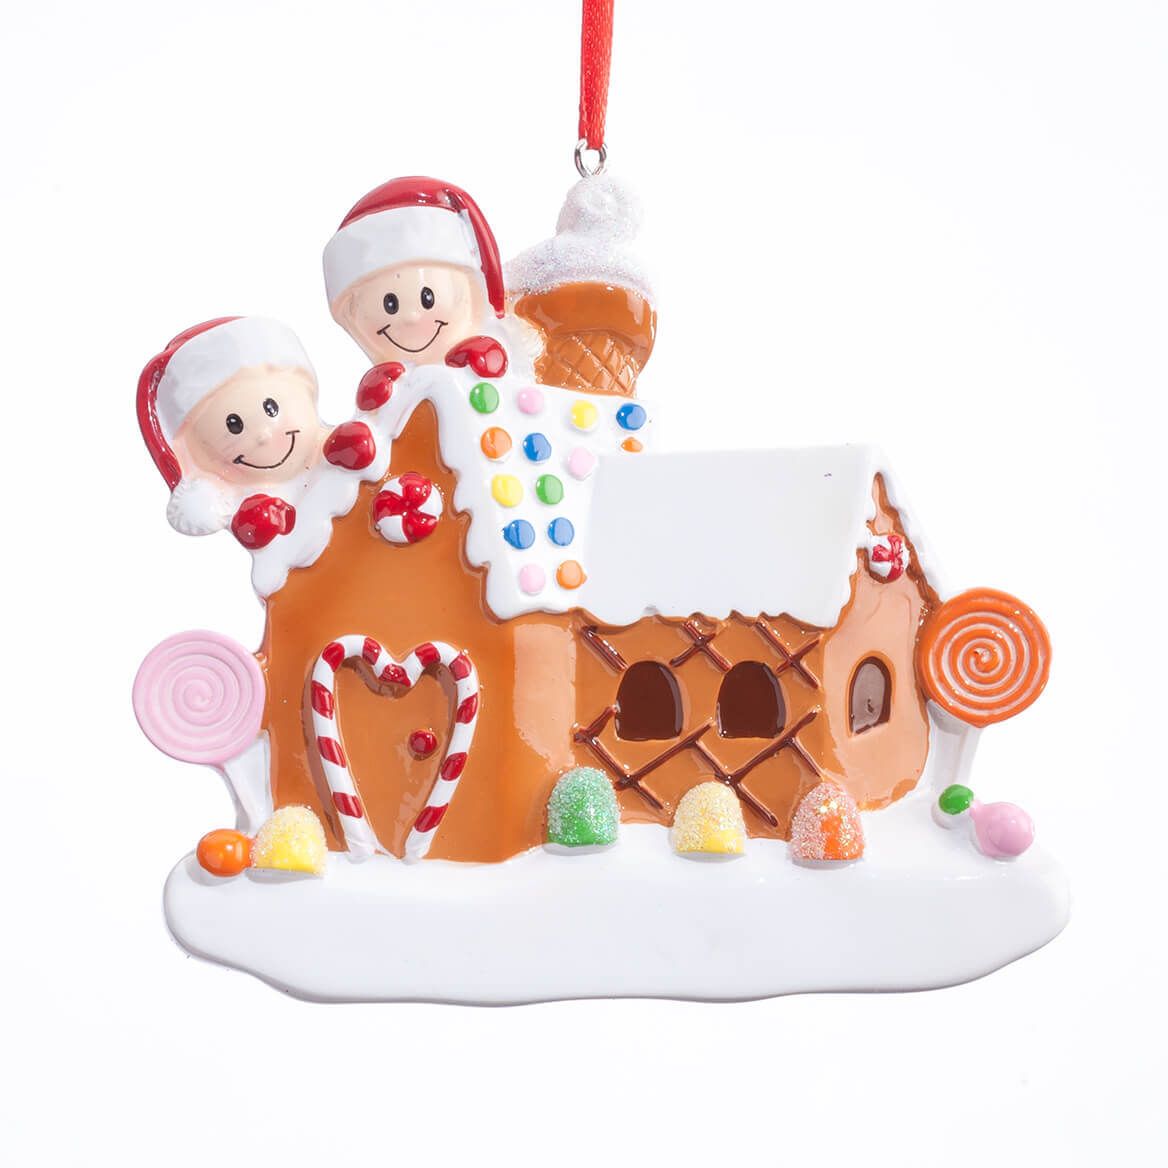 Gingerbread Family Ornament, Family of 2 + '-' + 360951